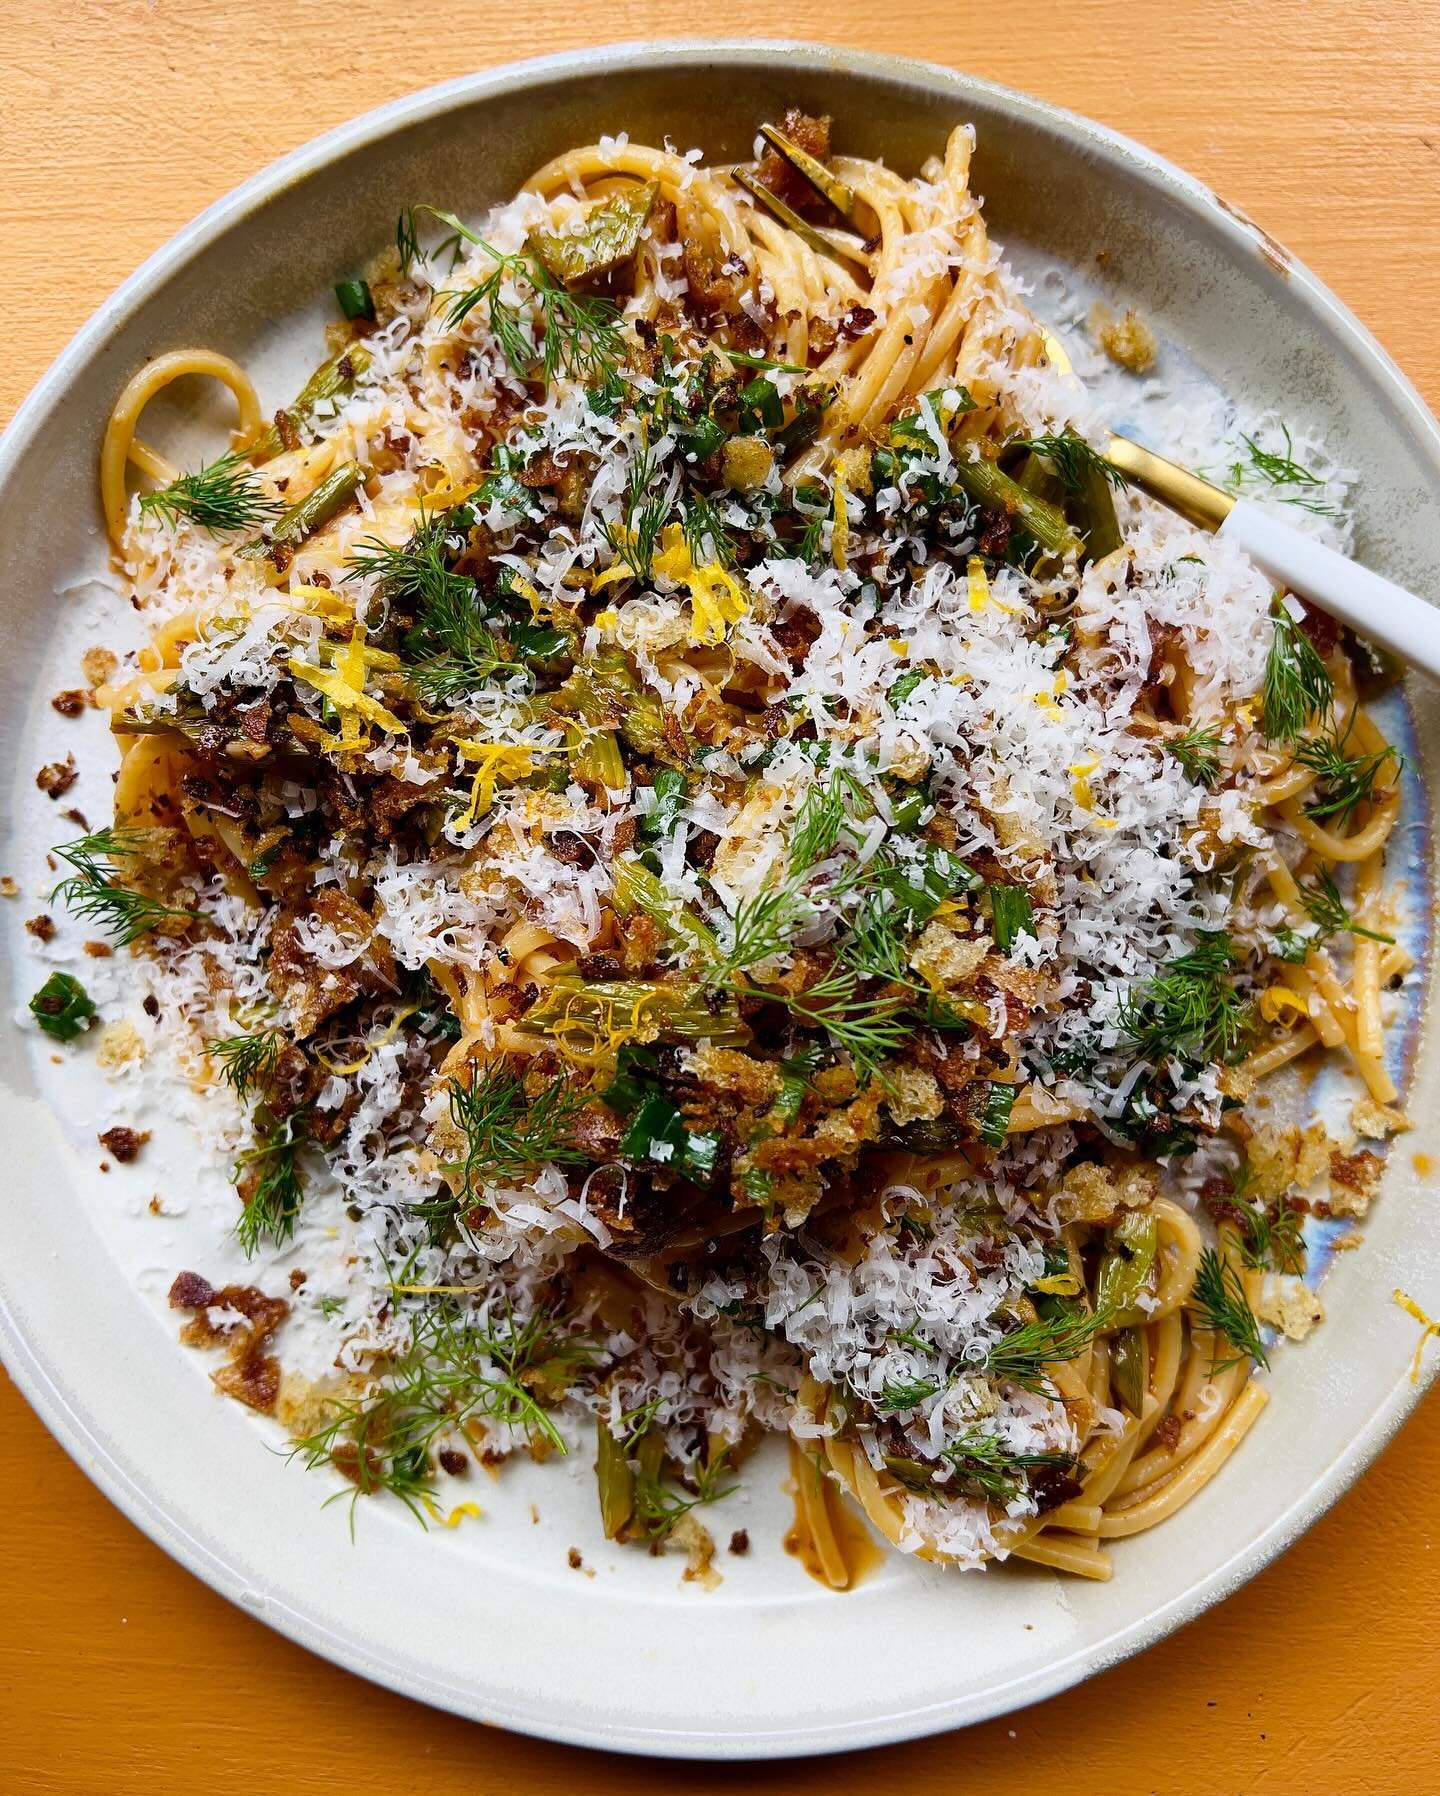 This casual super lemony, garlicky, asparagus-studded spaghetti alla chitarra topped with soooo many sourdough breadcrumbs, fresh dill, even more lemon zest and as always, all the parm, is chiefly brought to you by pregnancy cravings. When it&rsquo;s